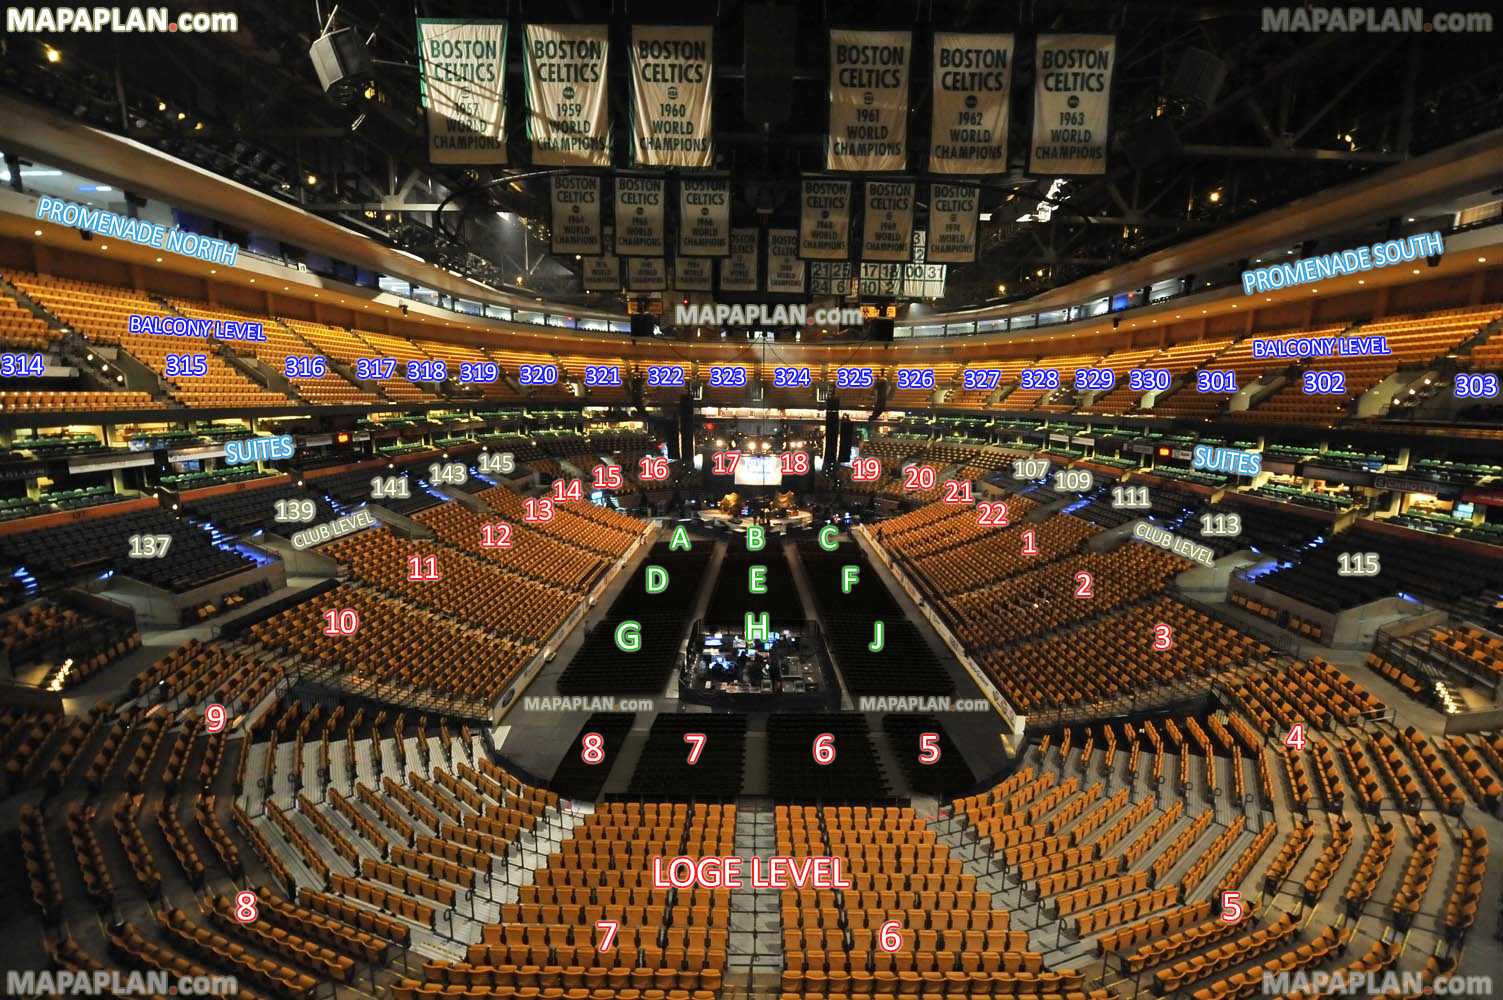 Boston TD Garden - View from Section 308 - Row 1 - Seat 19 ...